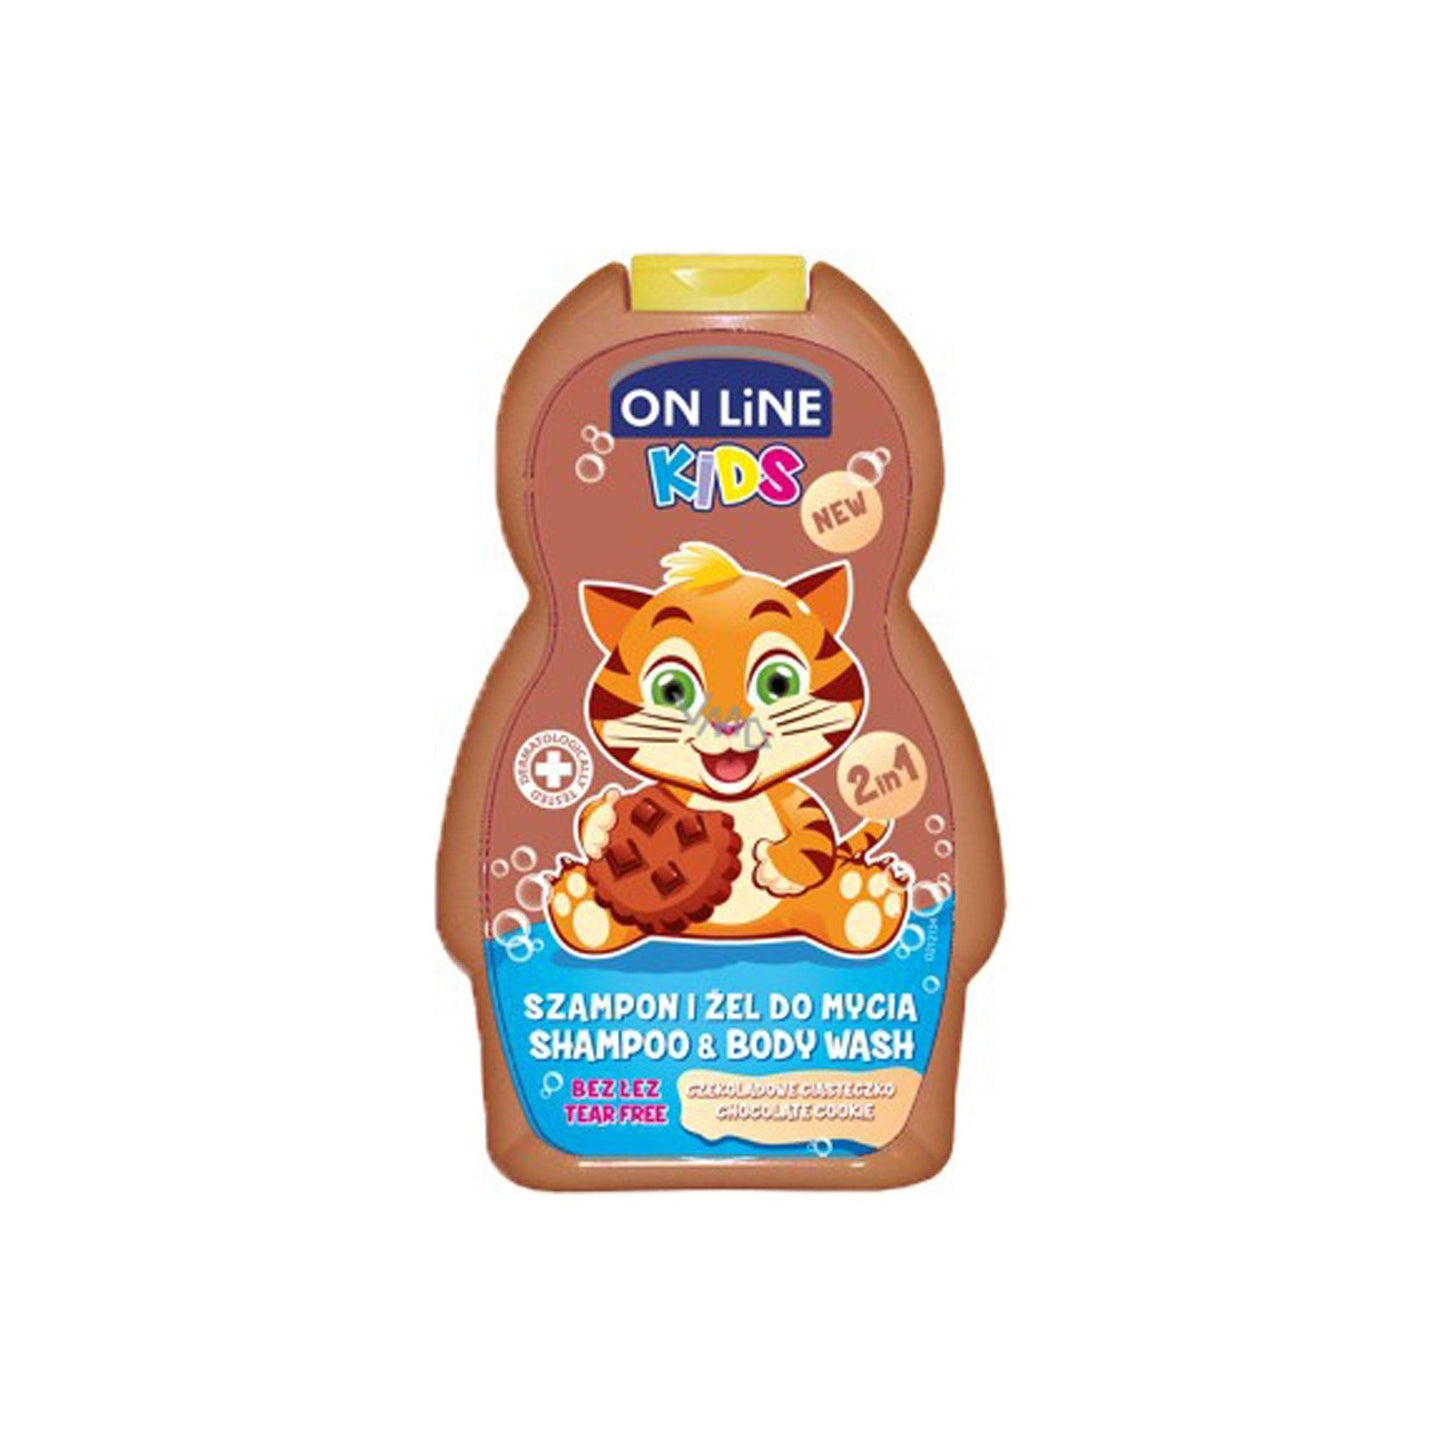 On Line Kids 2 In 1 Shampoo and Body Wash with Chocolate Cookie - Beauty Bounty